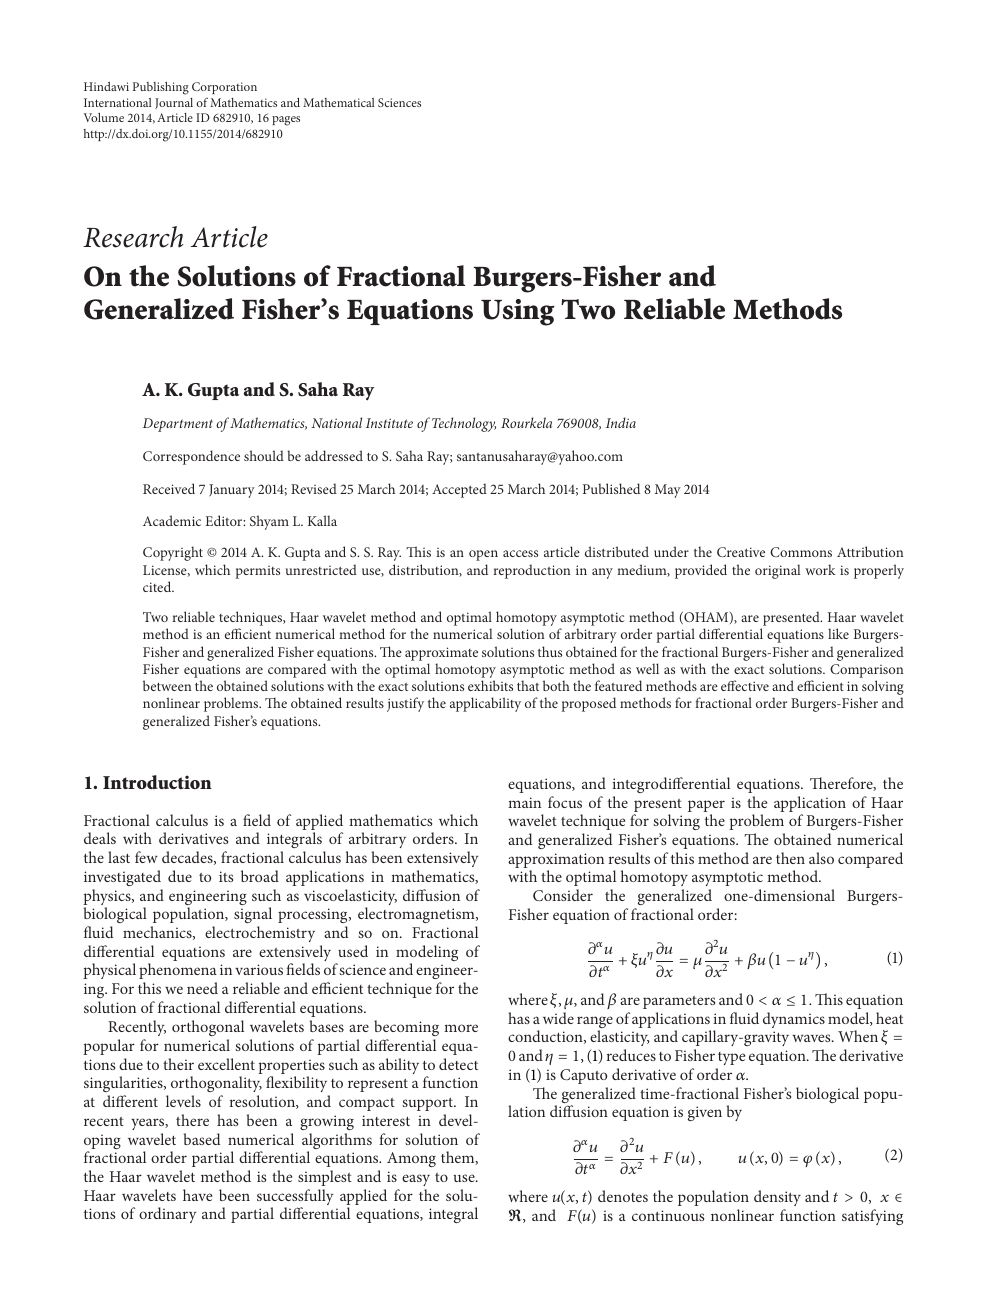 On The Solutions Of Fractional Burgers Fisher And Generalized Fisher S Equations Using Two Reliable Methods Topic Of Research Paper In Mathematics Download Scholarly Article Pdf And Read For Free On Cyberleninka Open